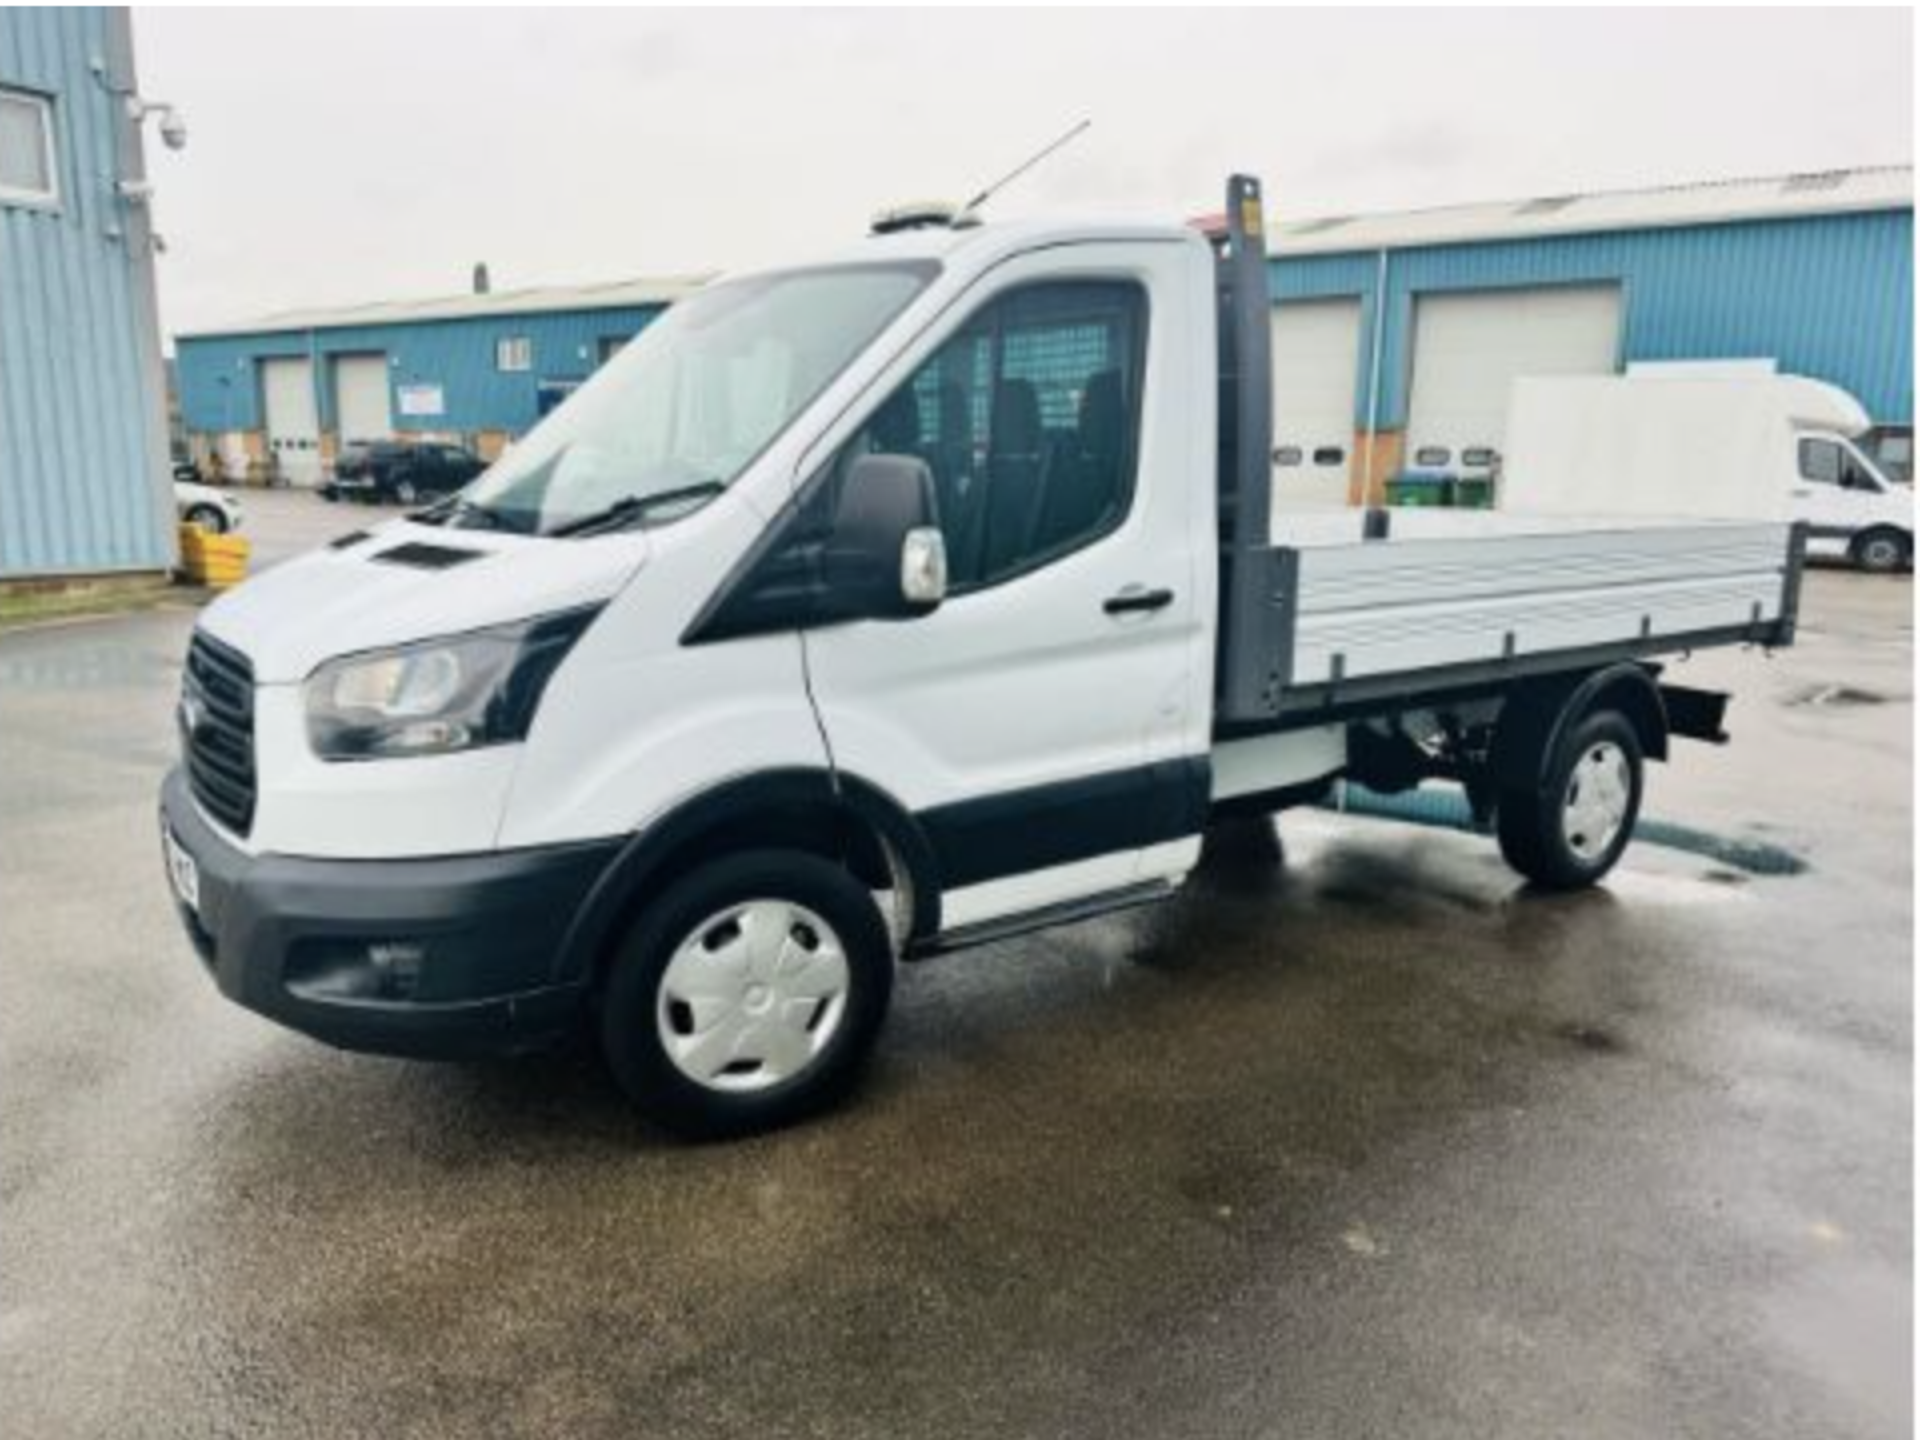 FORD TRANSIT 2.0 TIPPER130ps 'One Stop' Tipper - Manual - Diesel - 2.0 - Tipper Body 94.6k miles